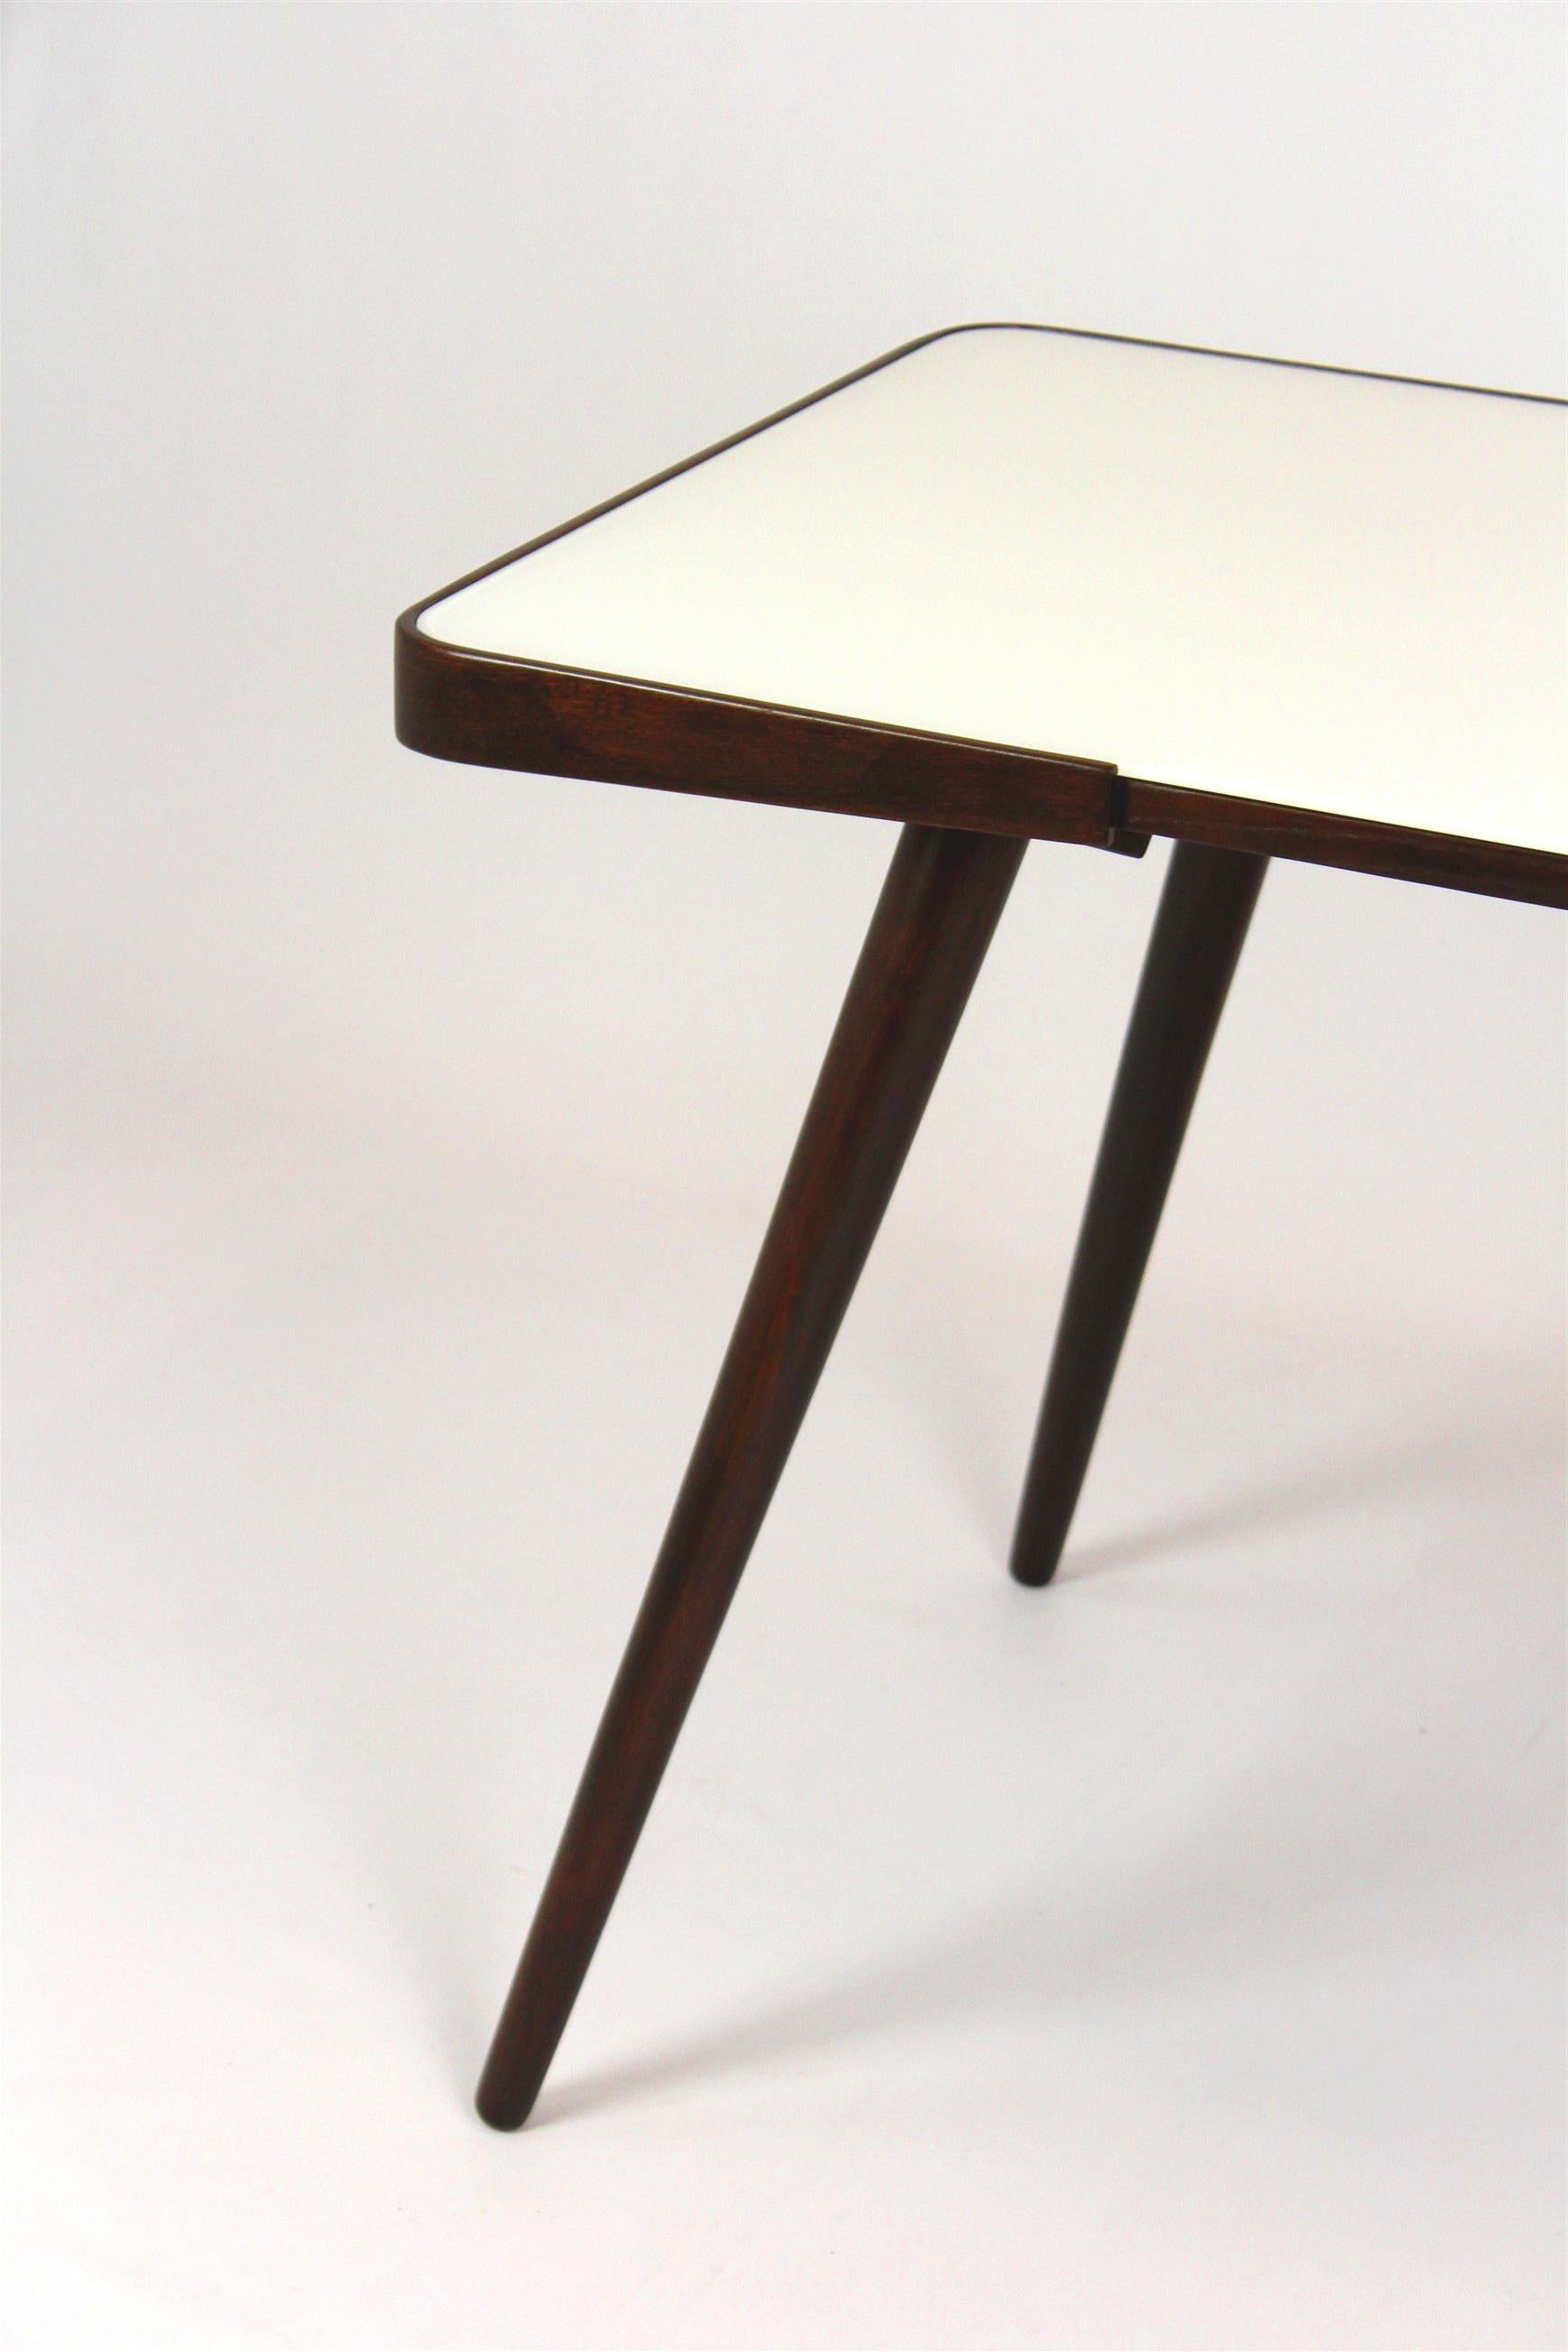 Coffee table with white glass top. Designed by Jiri Jiroutek and produced in the 1960s by Interier Praha. The table has been completely restored, lacquered wood, satin finished, new glass top.

